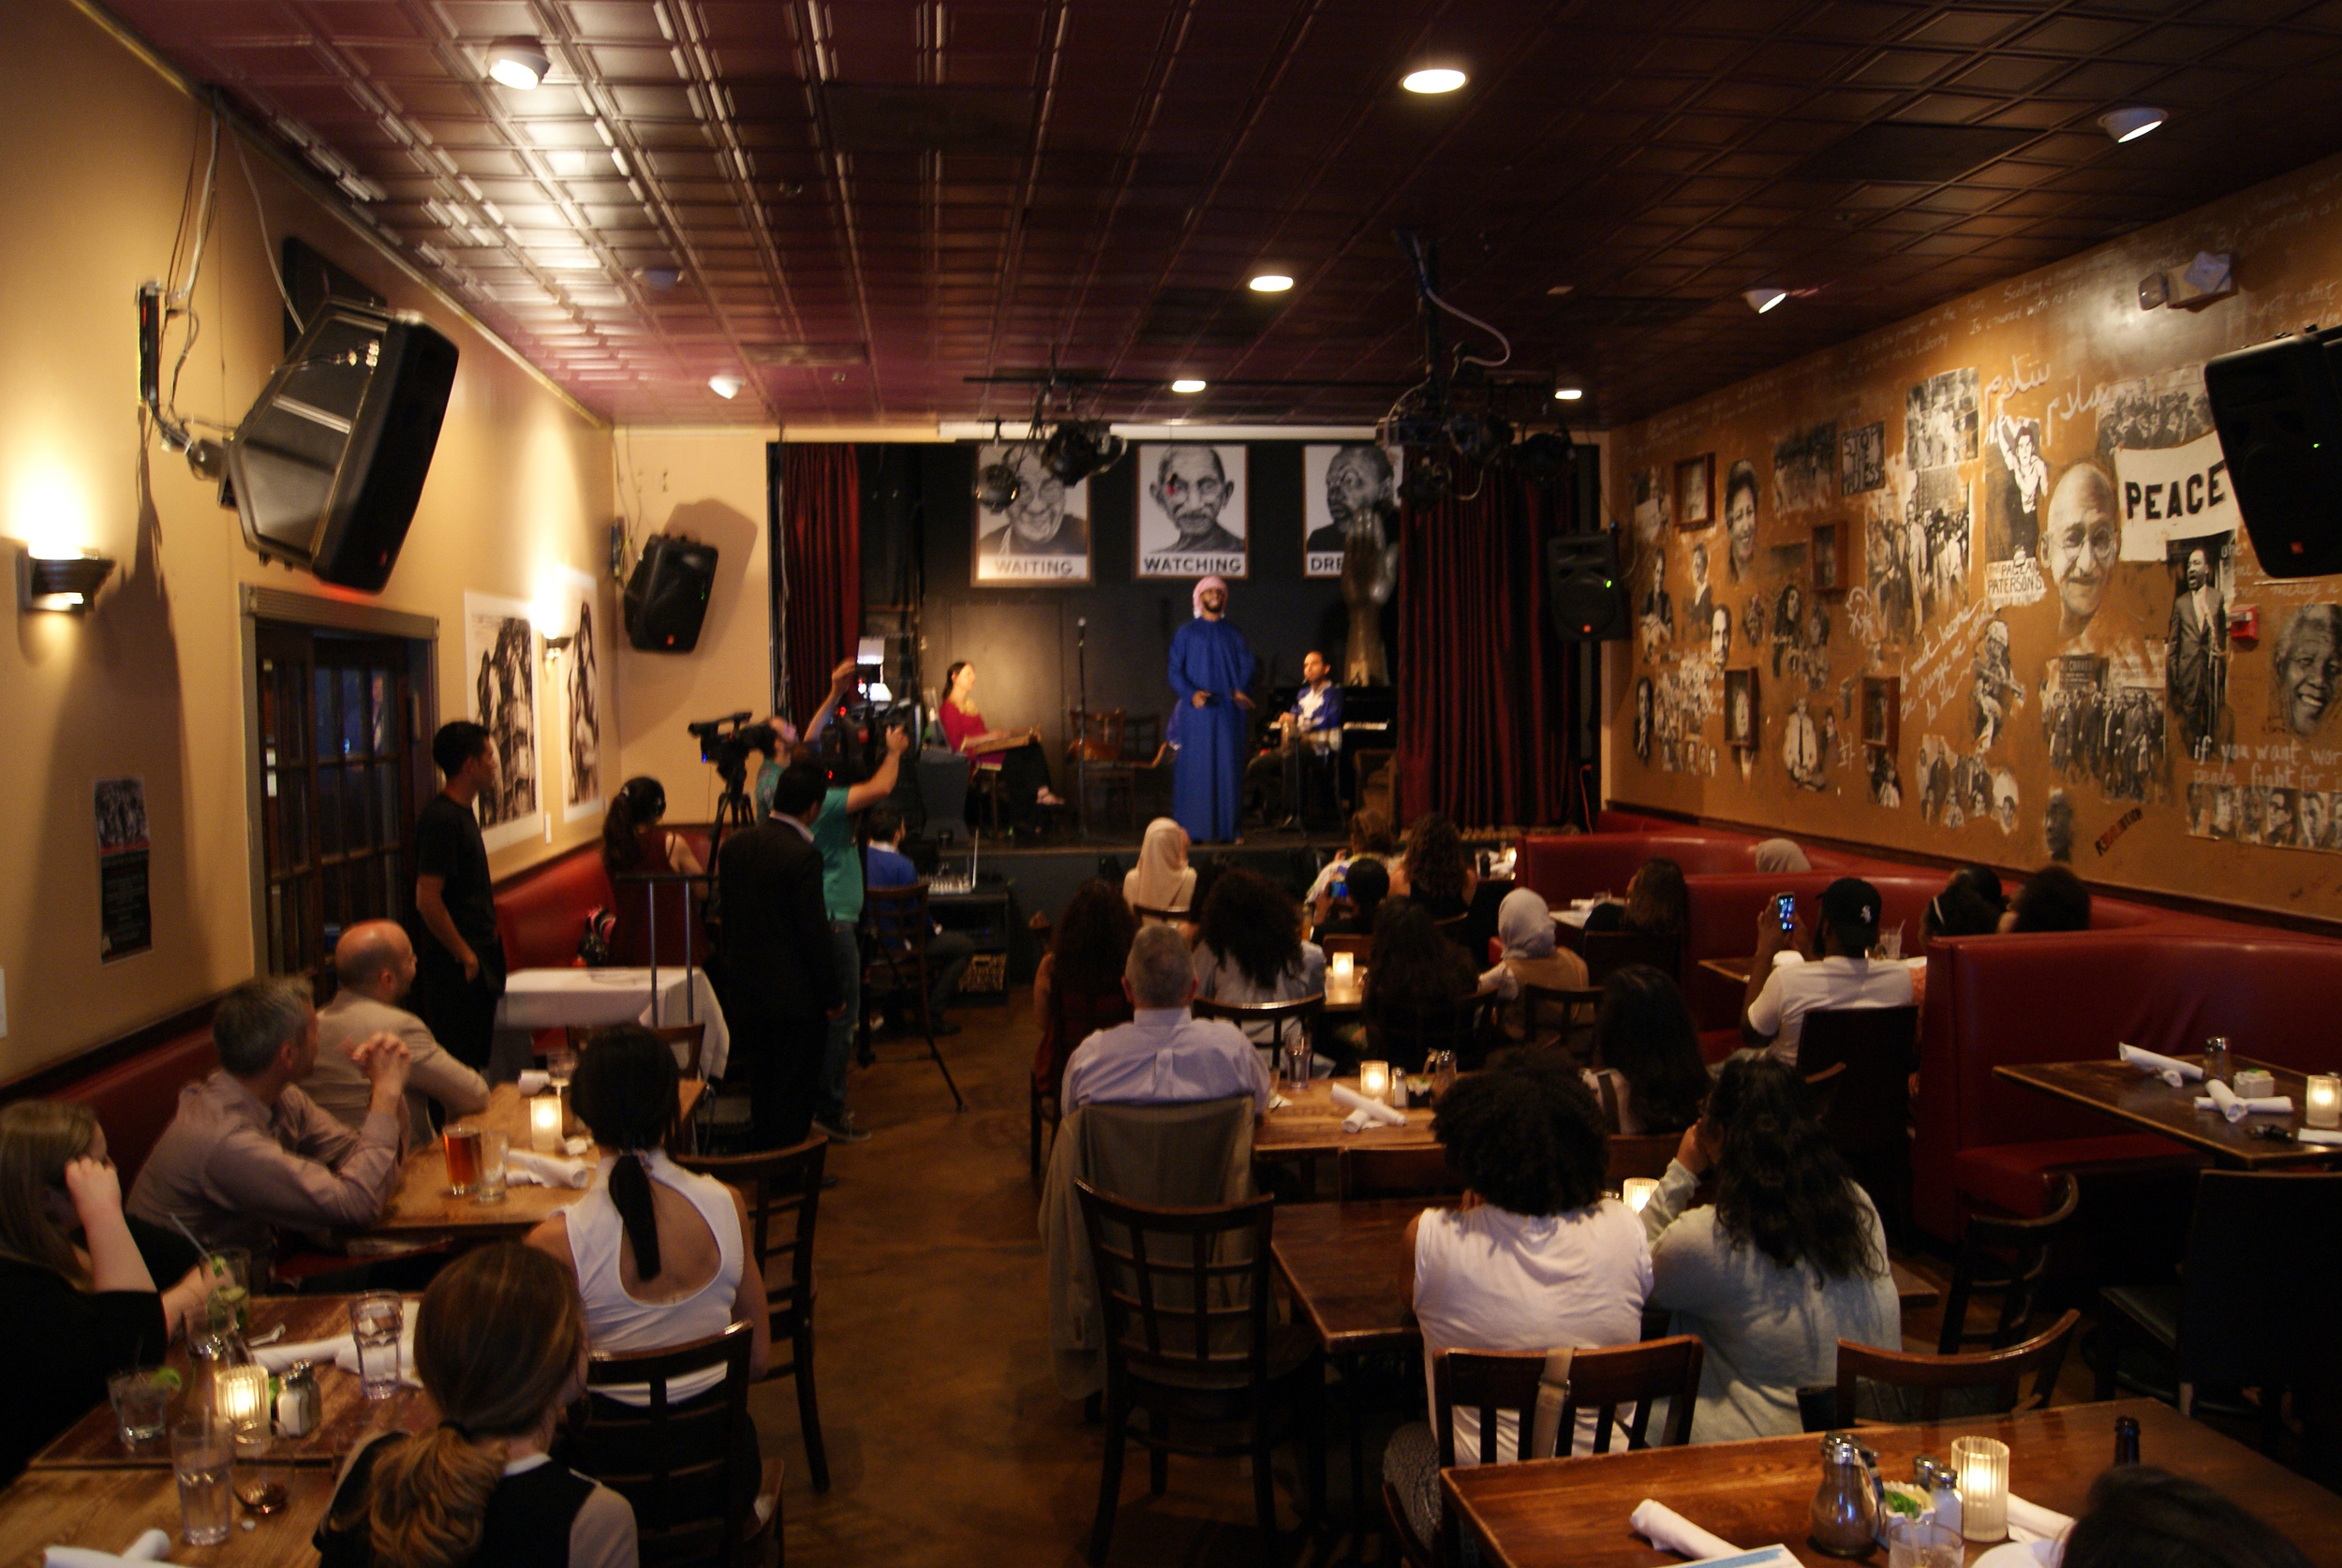   The audience gathers for  "RIWAYA: Spoken Word from the Gulf"  at Busboys &amp; Poets in Washington, D.C. June, 2016.  